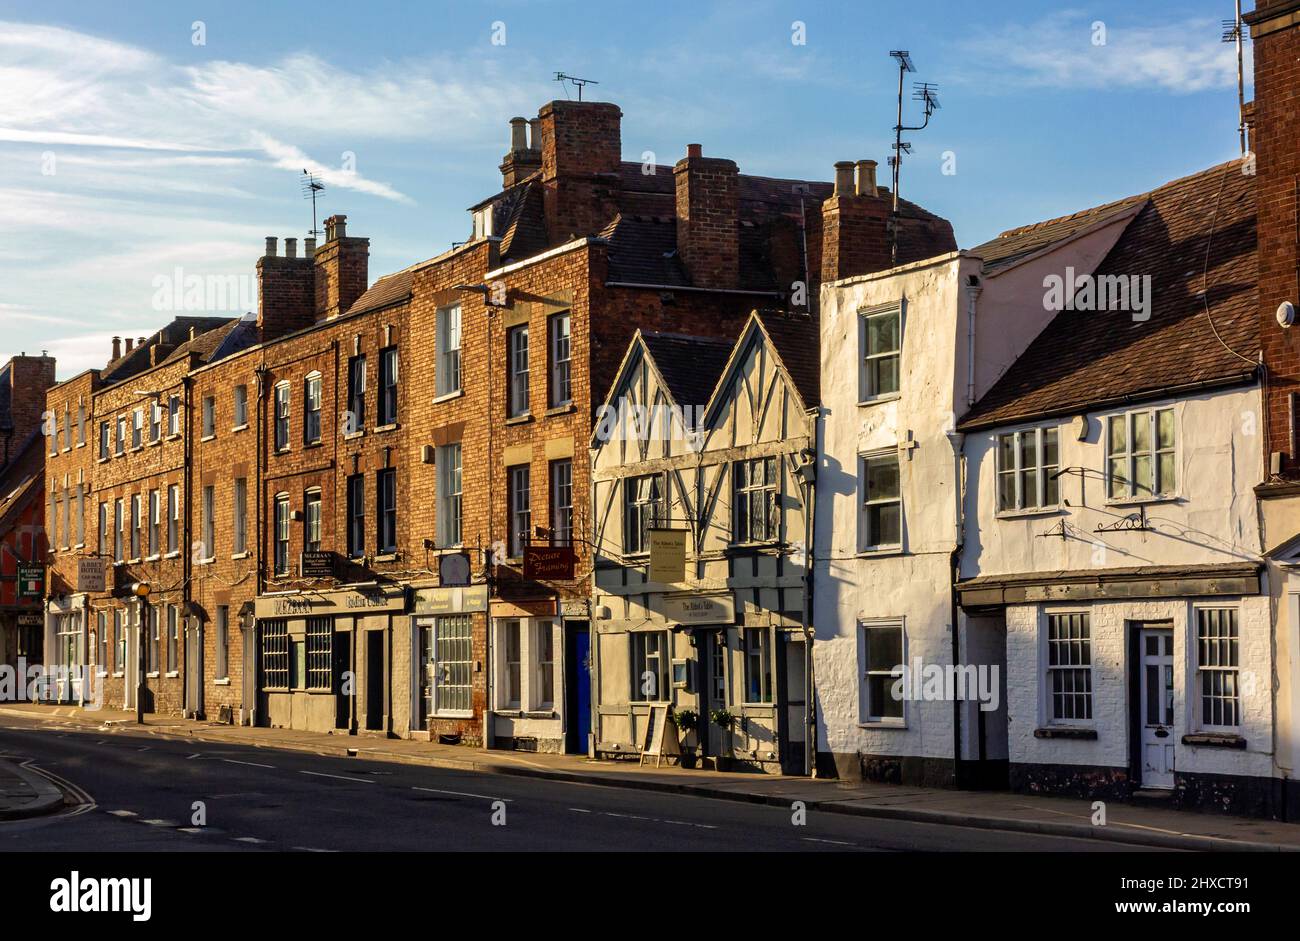 Traditional buildings and shops in the centre of Tewkesbury a town in Gloucestershire England UK. Stock Photo